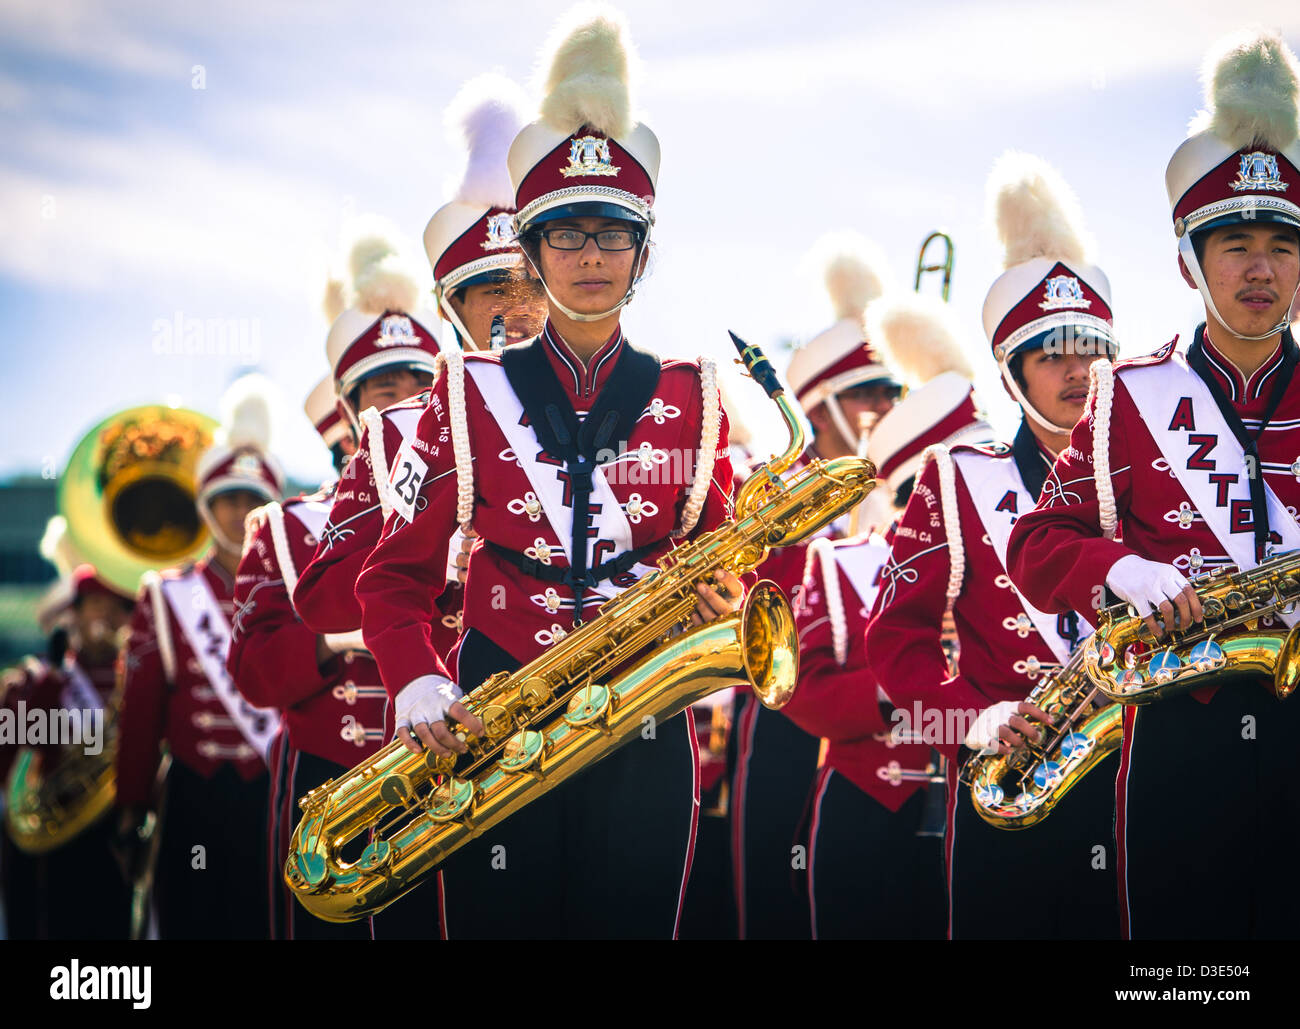 The Mark Keppel High School Aztec Band of Alhambra, California marching during  2013 Chinese New Year parade. Stock Photo